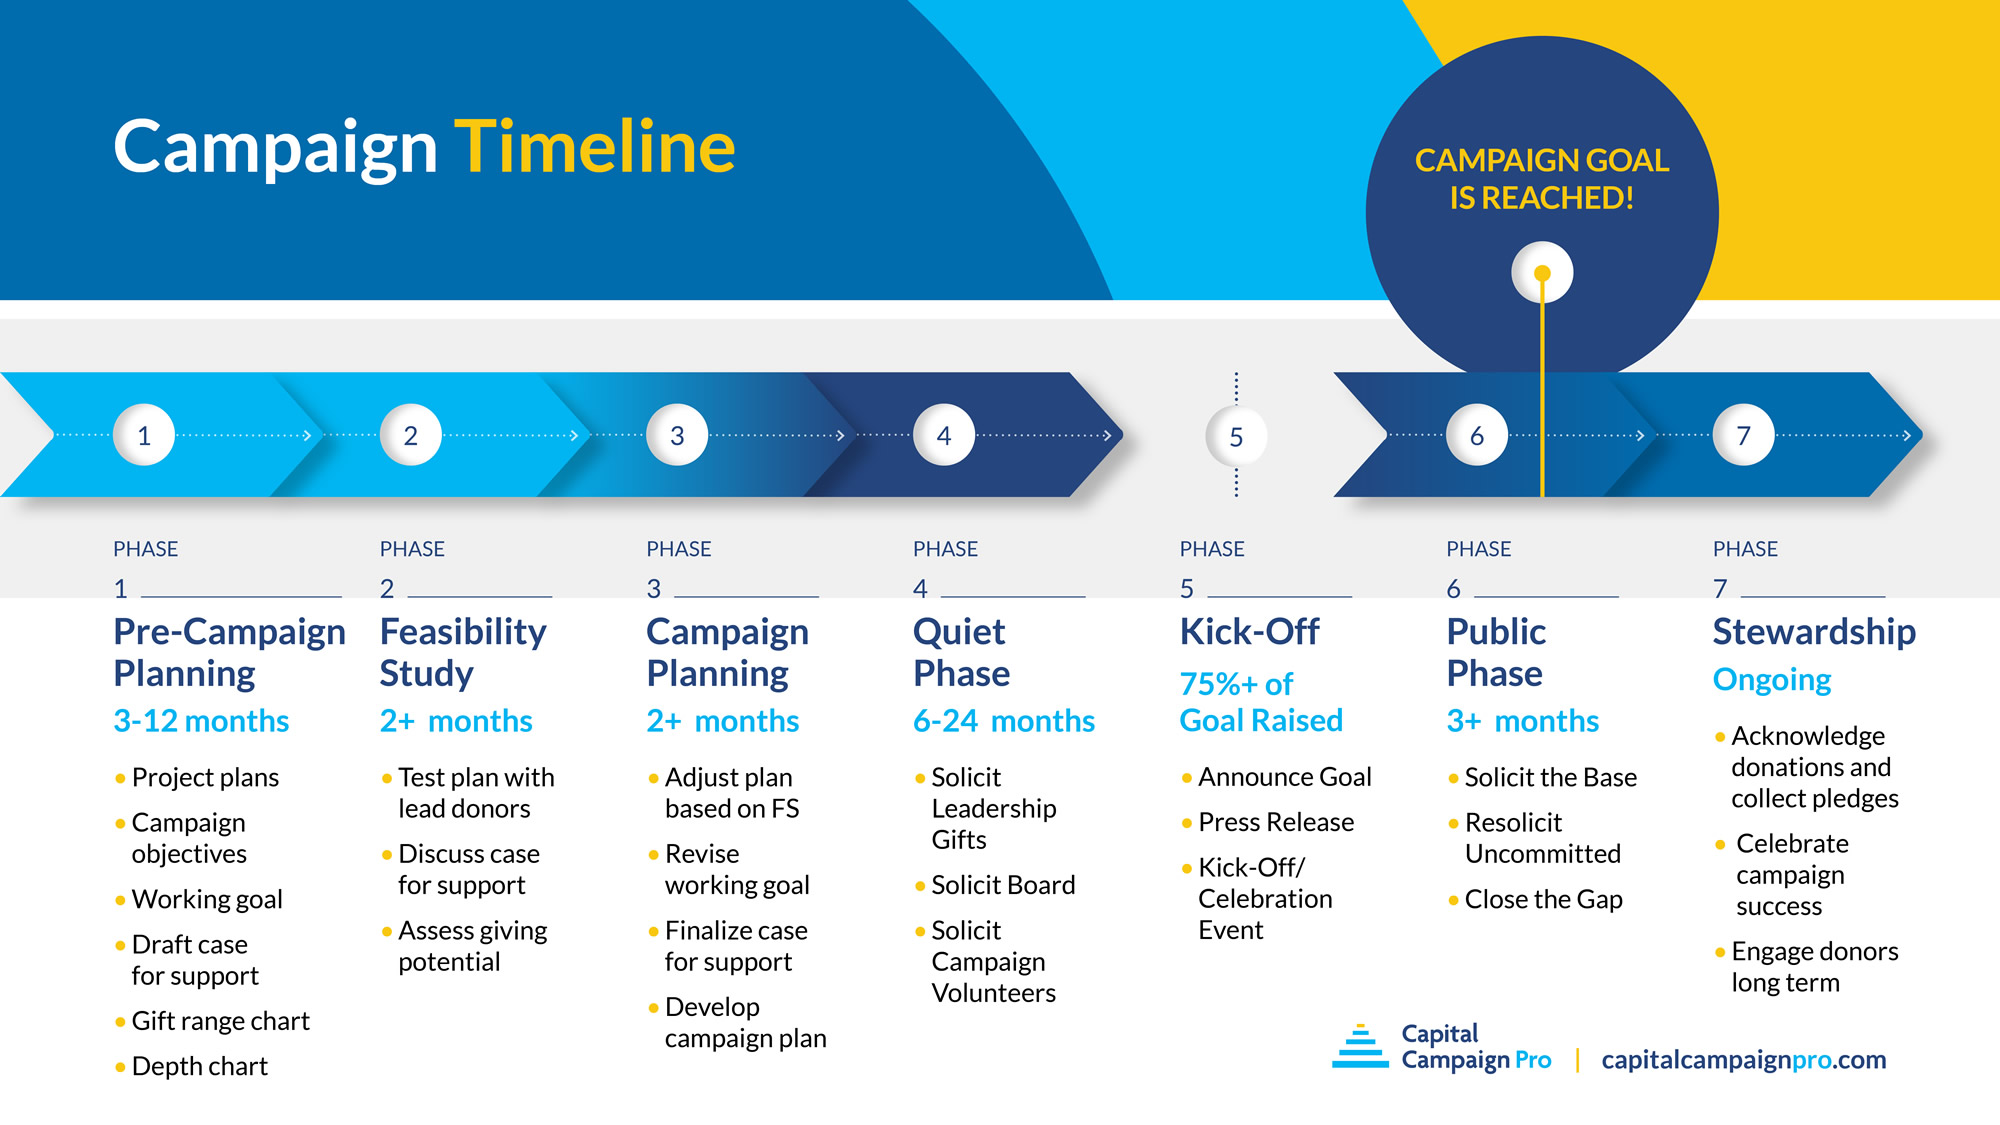 Capital Campaign Phases